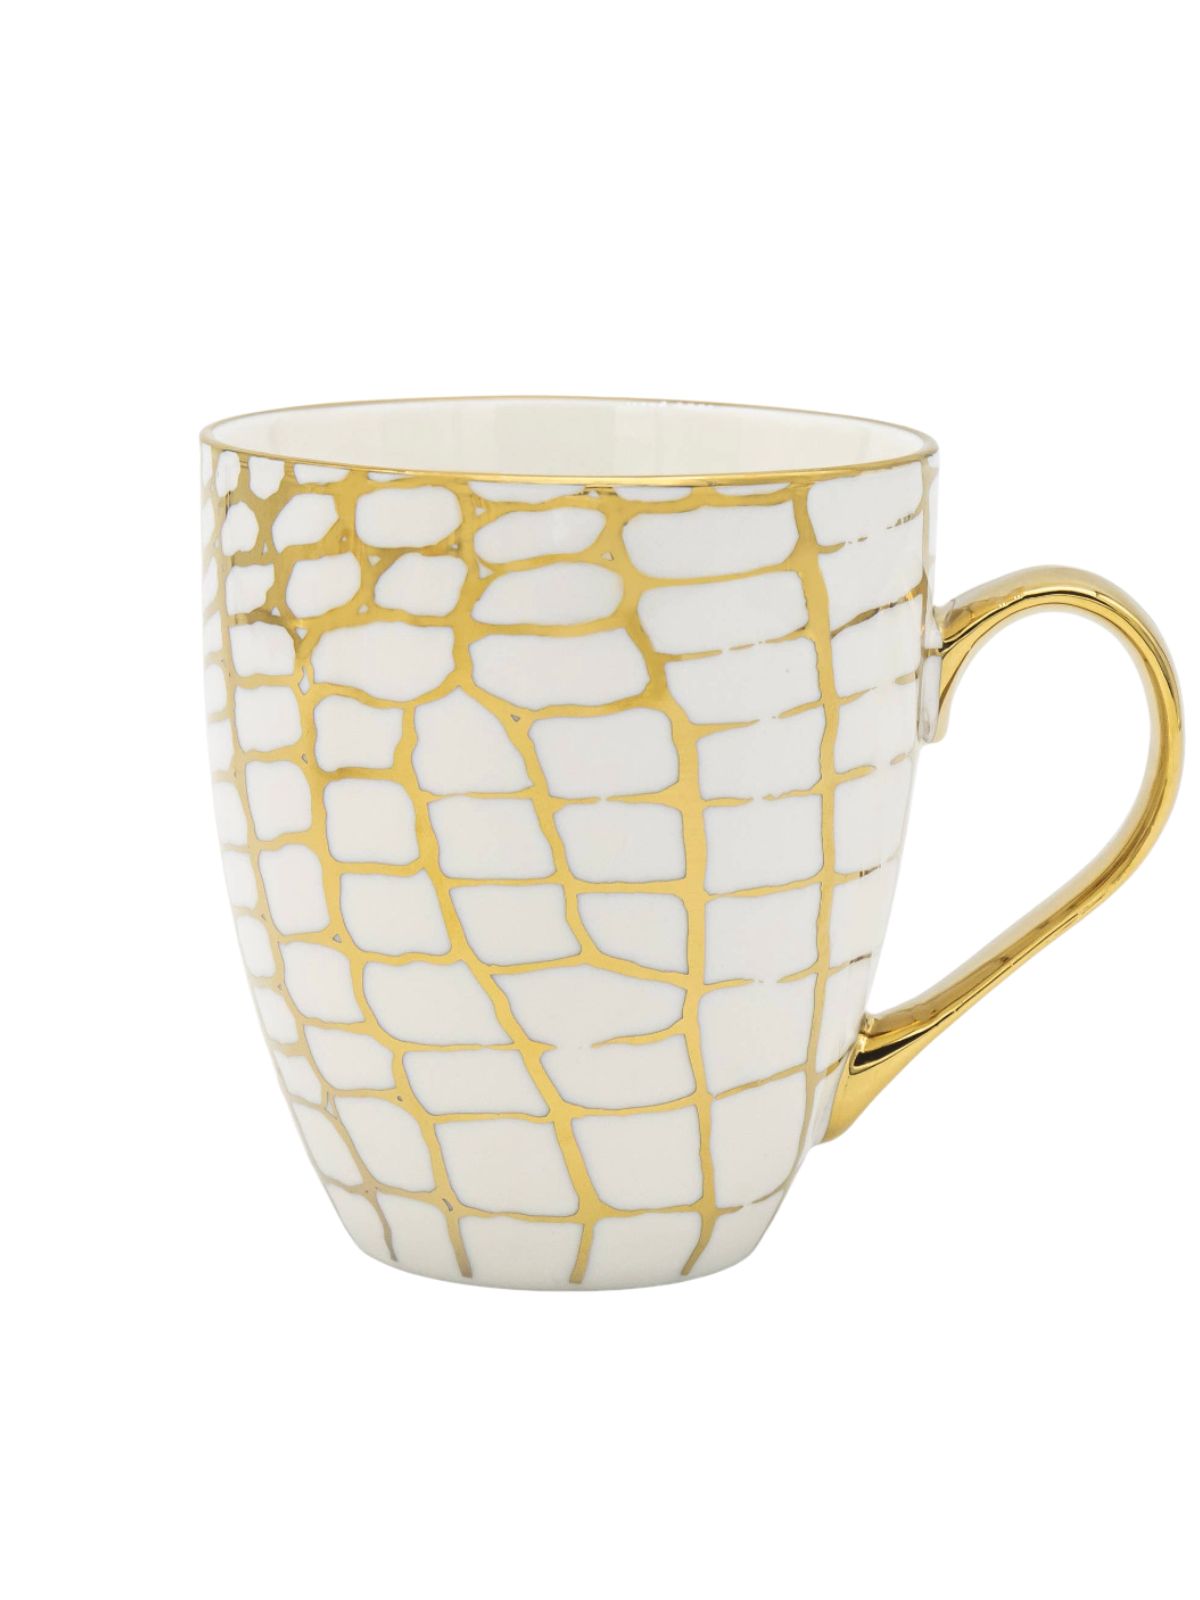 Enjoy your favorite beverage in style with our animal print gold plated mugs. With a generously sized 19 oz capacity available in 4 different gold designs on a white porcelain tapered shape mug, they coordinate beautifully with any décor.  